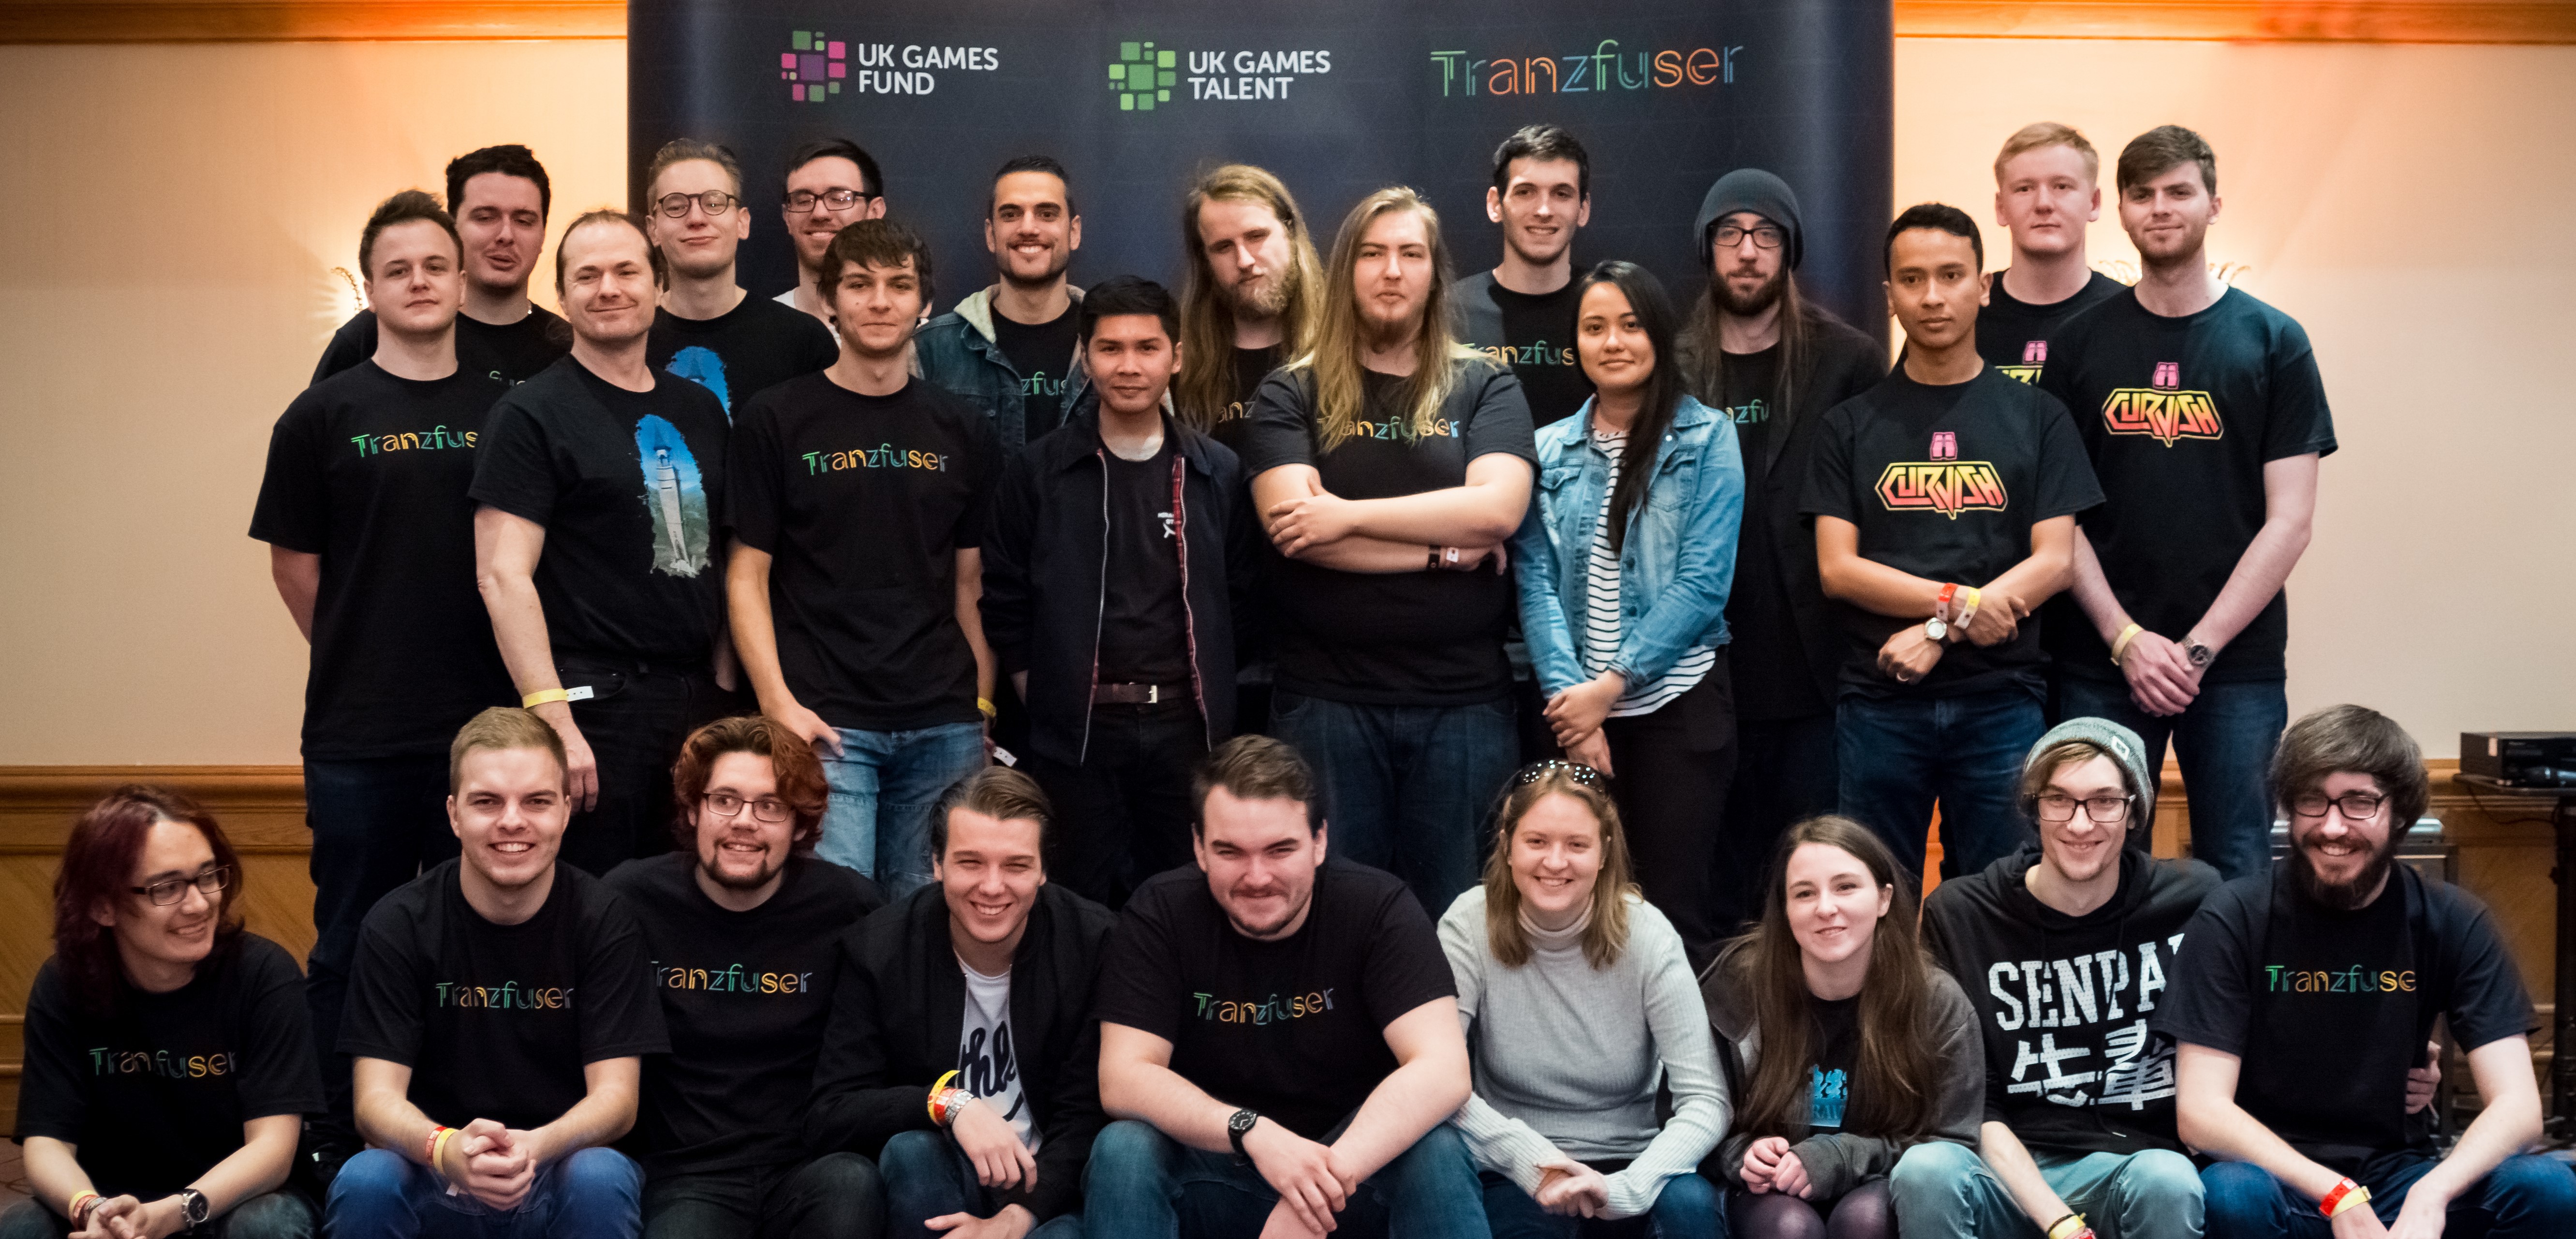 Tranzfuser offers funding for graduate games developers